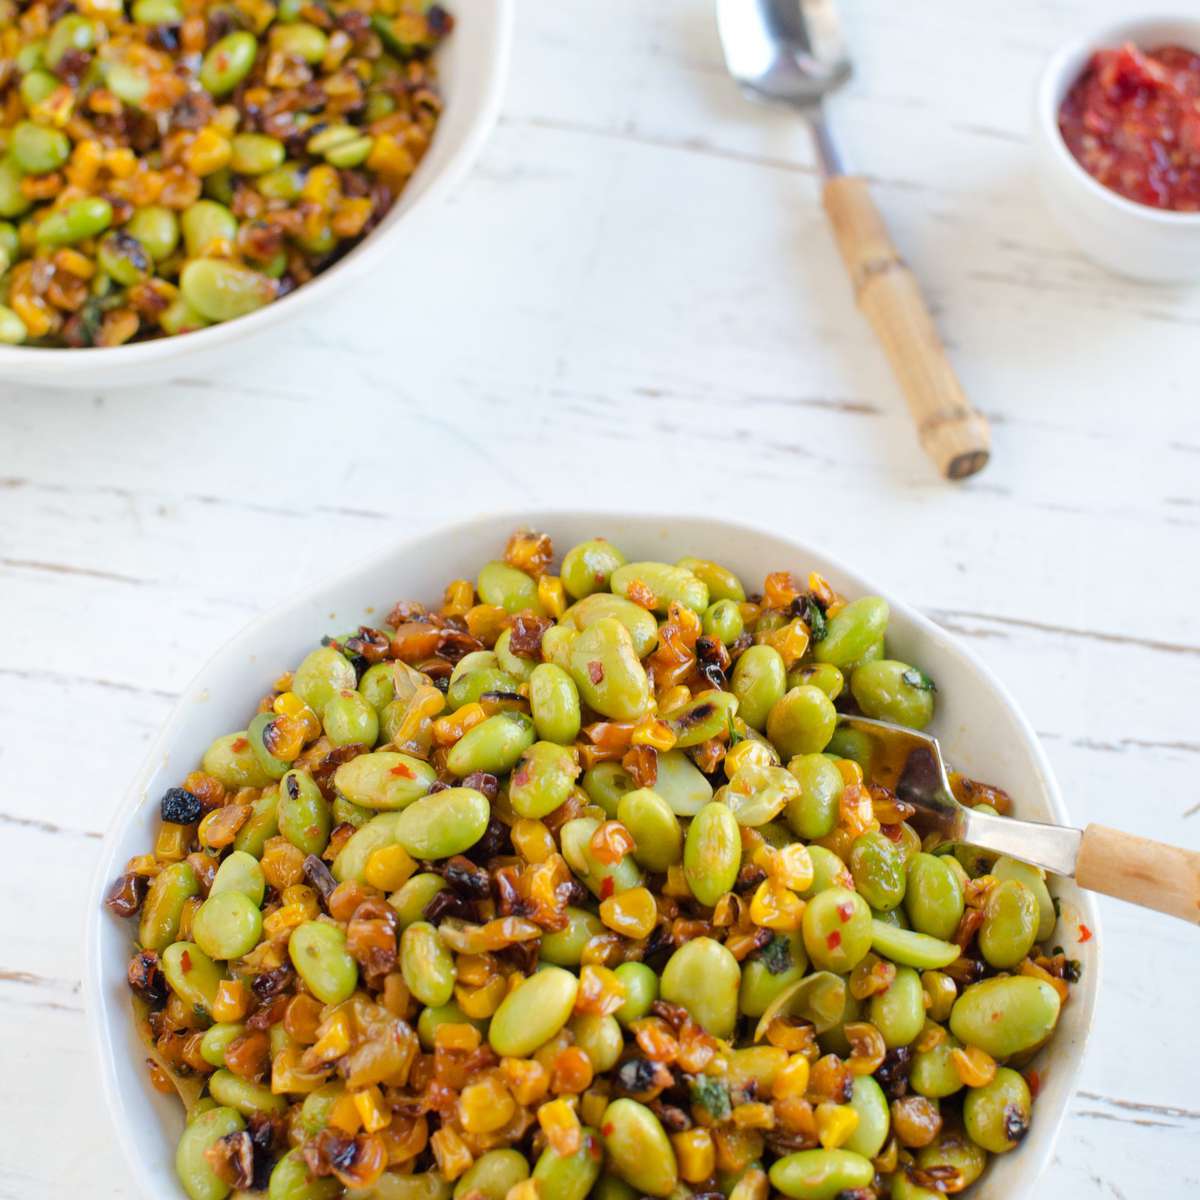 Roasted Corn and Edamame Stir-fry with Chili Cilantro Lime Sauce